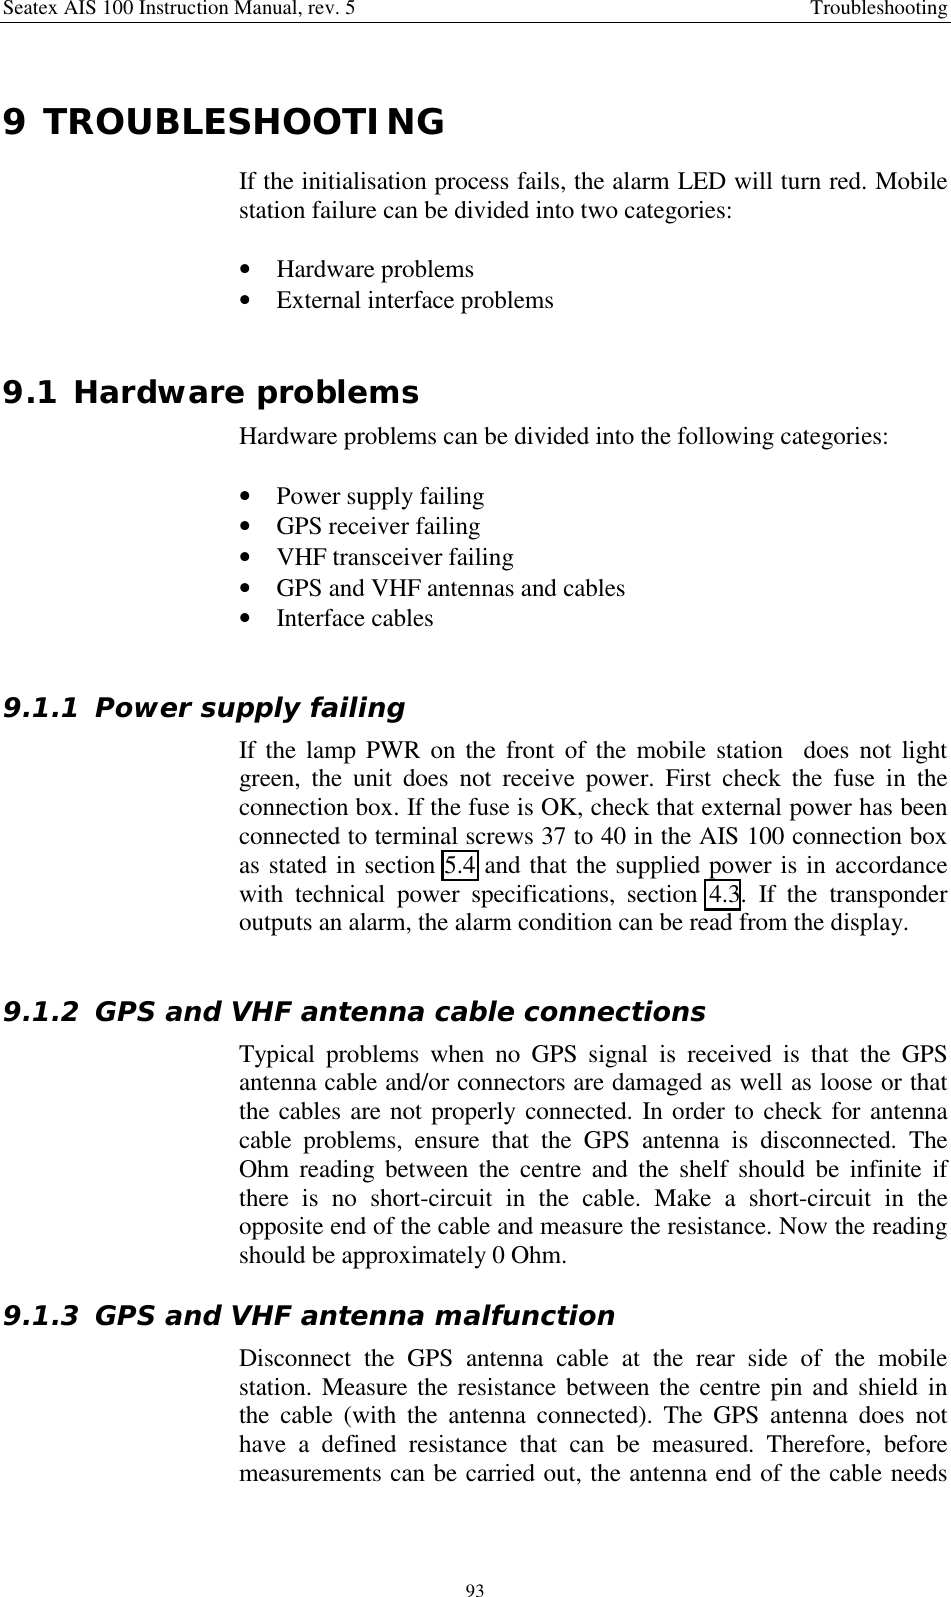 Seatex AIS 100 Instruction Manual, rev. 5 Troubleshooting939 TROUBLESHOOTINGIf the initialisation process fails, the alarm LED will turn red. Mobilestation failure can be divided into two categories:• Hardware problems• External interface problems9.1 Hardware problemsHardware problems can be divided into the following categories:• Power supply failing• GPS receiver failing• VHF transceiver failing• GPS and VHF antennas and cables• Interface cables9.1.1 Power supply failingIf the lamp PWR on the front of the mobile station  does not lightgreen, the unit does not receive power. First check the fuse in theconnection box. If the fuse is OK, check that external power has beenconnected to terminal screws 37 to 40 in the AIS 100 connection boxas stated in section 5.4 and that the supplied power is in accordancewith technical power specifications, section 4.3. If the transponderoutputs an alarm, the alarm condition can be read from the display.9.1.2 GPS and VHF antenna cable connectionsTypical problems when no GPS signal is received is that the GPSantenna cable and/or connectors are damaged as well as loose or thatthe cables are not properly connected. In order to check for antennacable problems, ensure that the GPS antenna is disconnected. TheOhm reading between the centre and the shelf should be infinite ifthere is no short-circuit in the cable. Make a short-circuit in theopposite end of the cable and measure the resistance. Now the readingshould be approximately 0 Ohm.9.1.3 GPS and VHF antenna malfunctionDisconnect the GPS antenna cable at the rear side of the mobilestation. Measure the resistance between the centre pin and shield inthe cable (with the antenna connected). The GPS antenna does nothave a defined resistance that can be measured. Therefore, beforemeasurements can be carried out, the antenna end of the cable needs